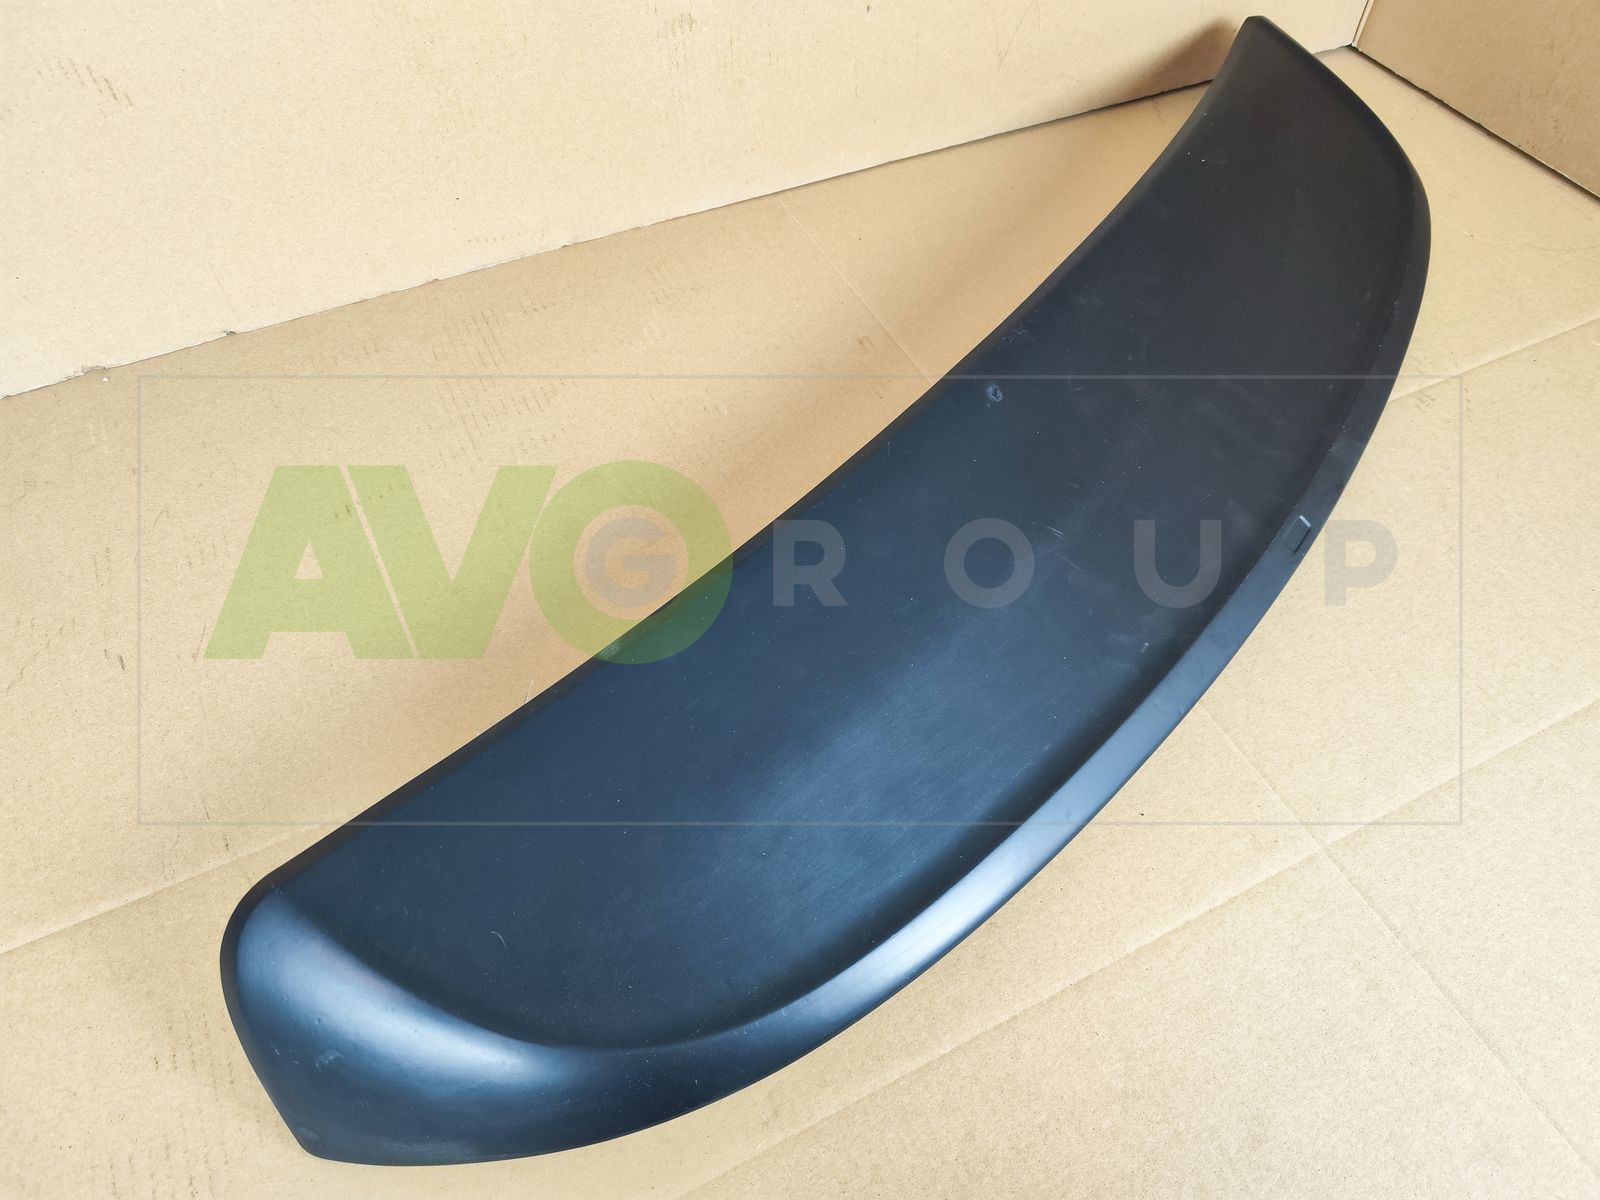 A Look Rear Trunk Roof Spoiler for Audi A6 C7 S6 4G Avant 2011-2018